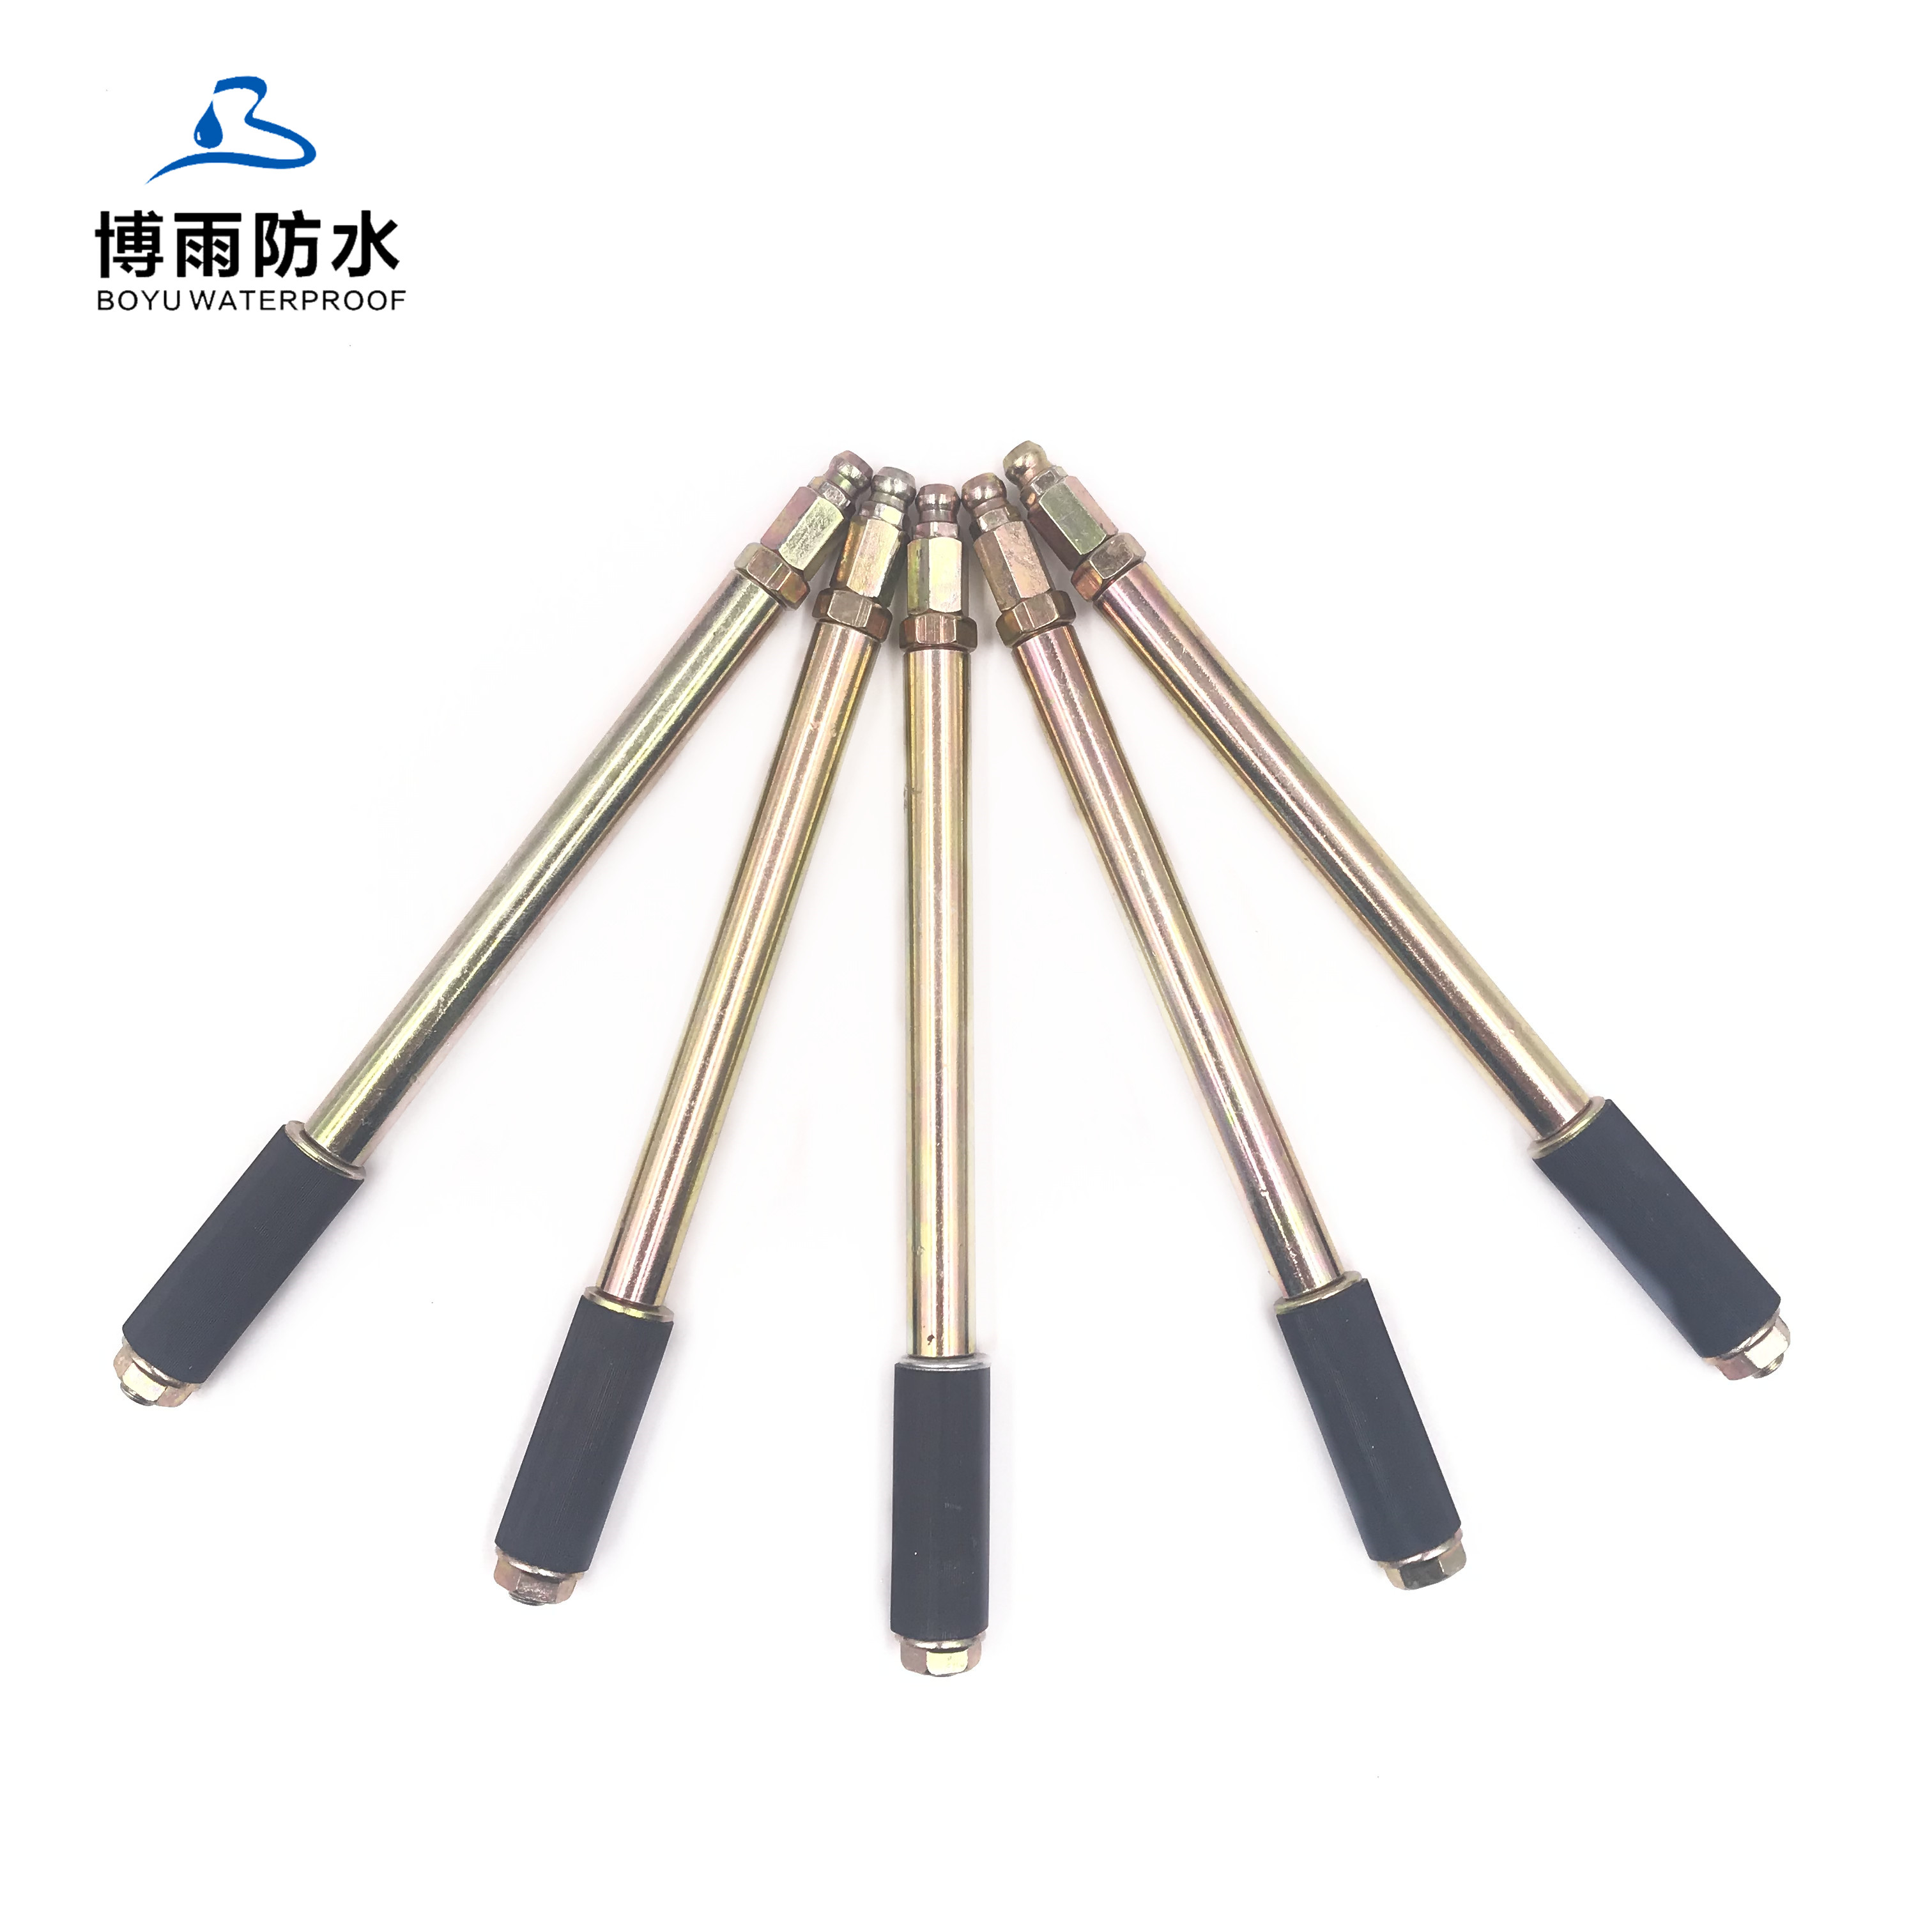 Best Price for Metal Injection Packers - Brass color Injection Packers steel 13*150mm A15 grouting injection packers – Boyu